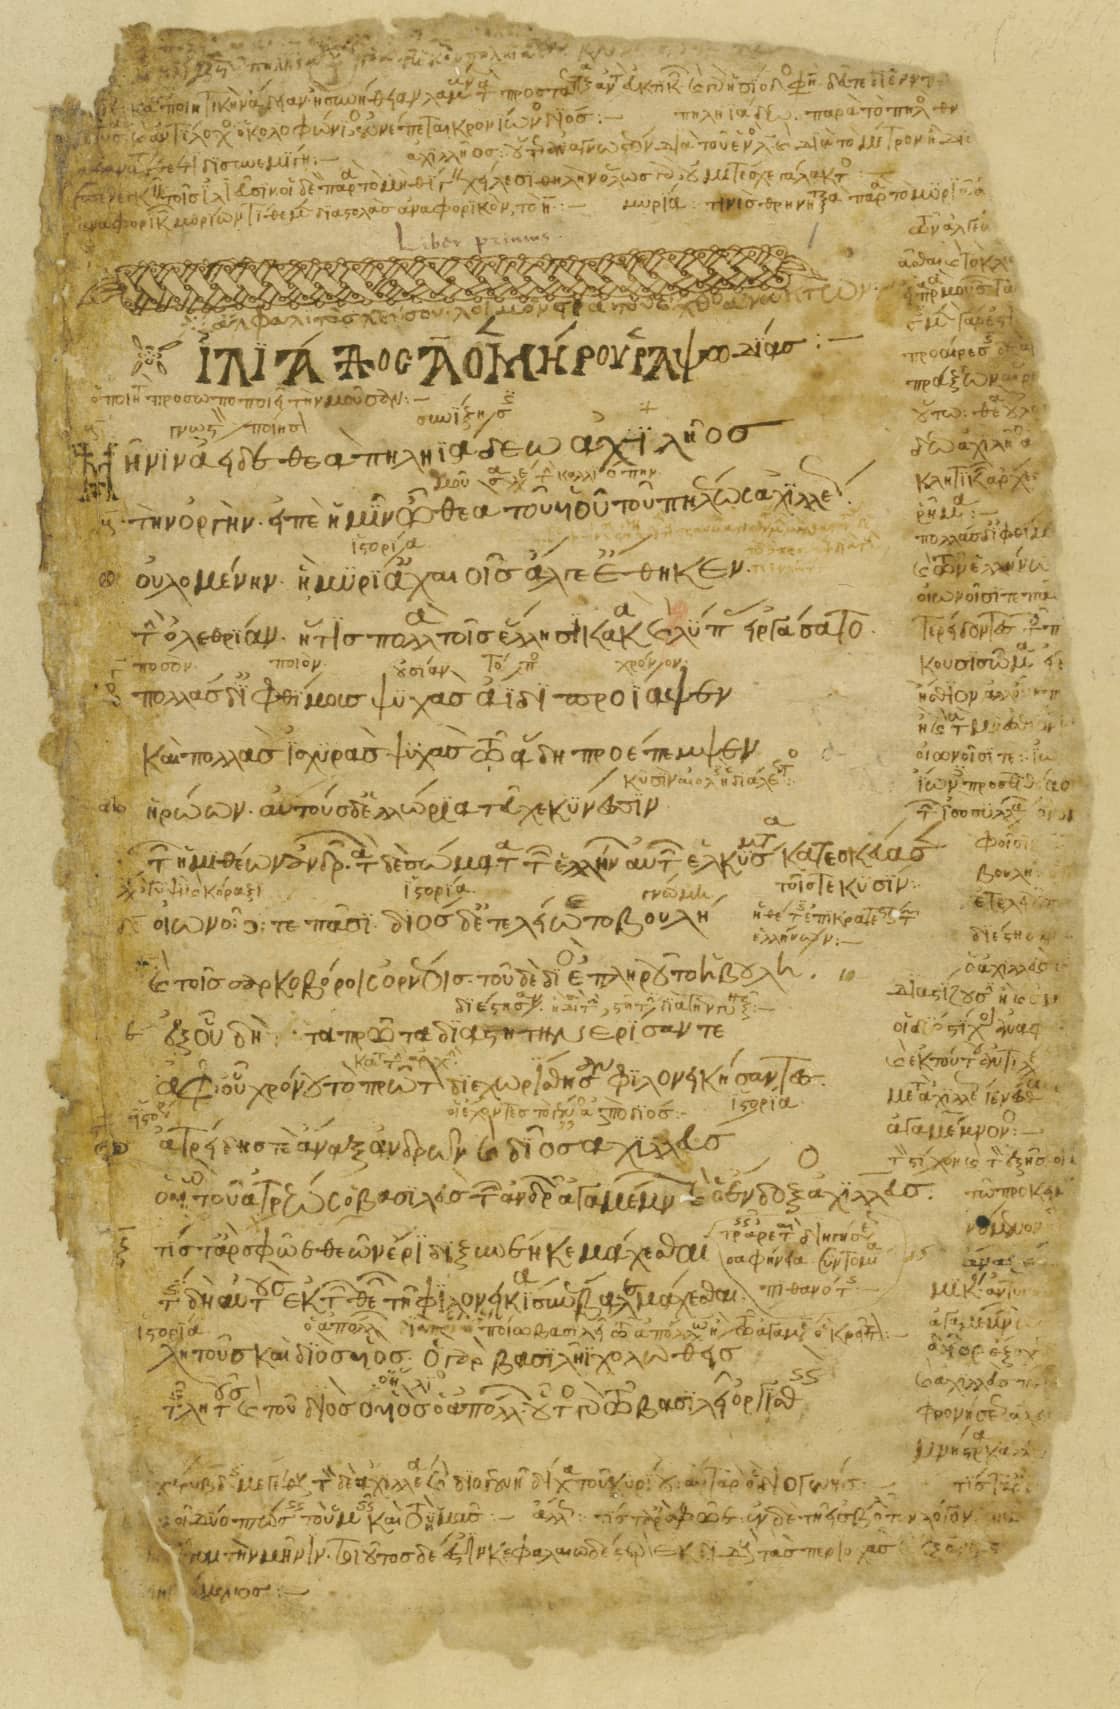 Genève, Bibliothèque de Genève, Ms. gr. 44, p. 1 – Homer, Iliad with scholia and an interlinear paraphrase of Books I to XII